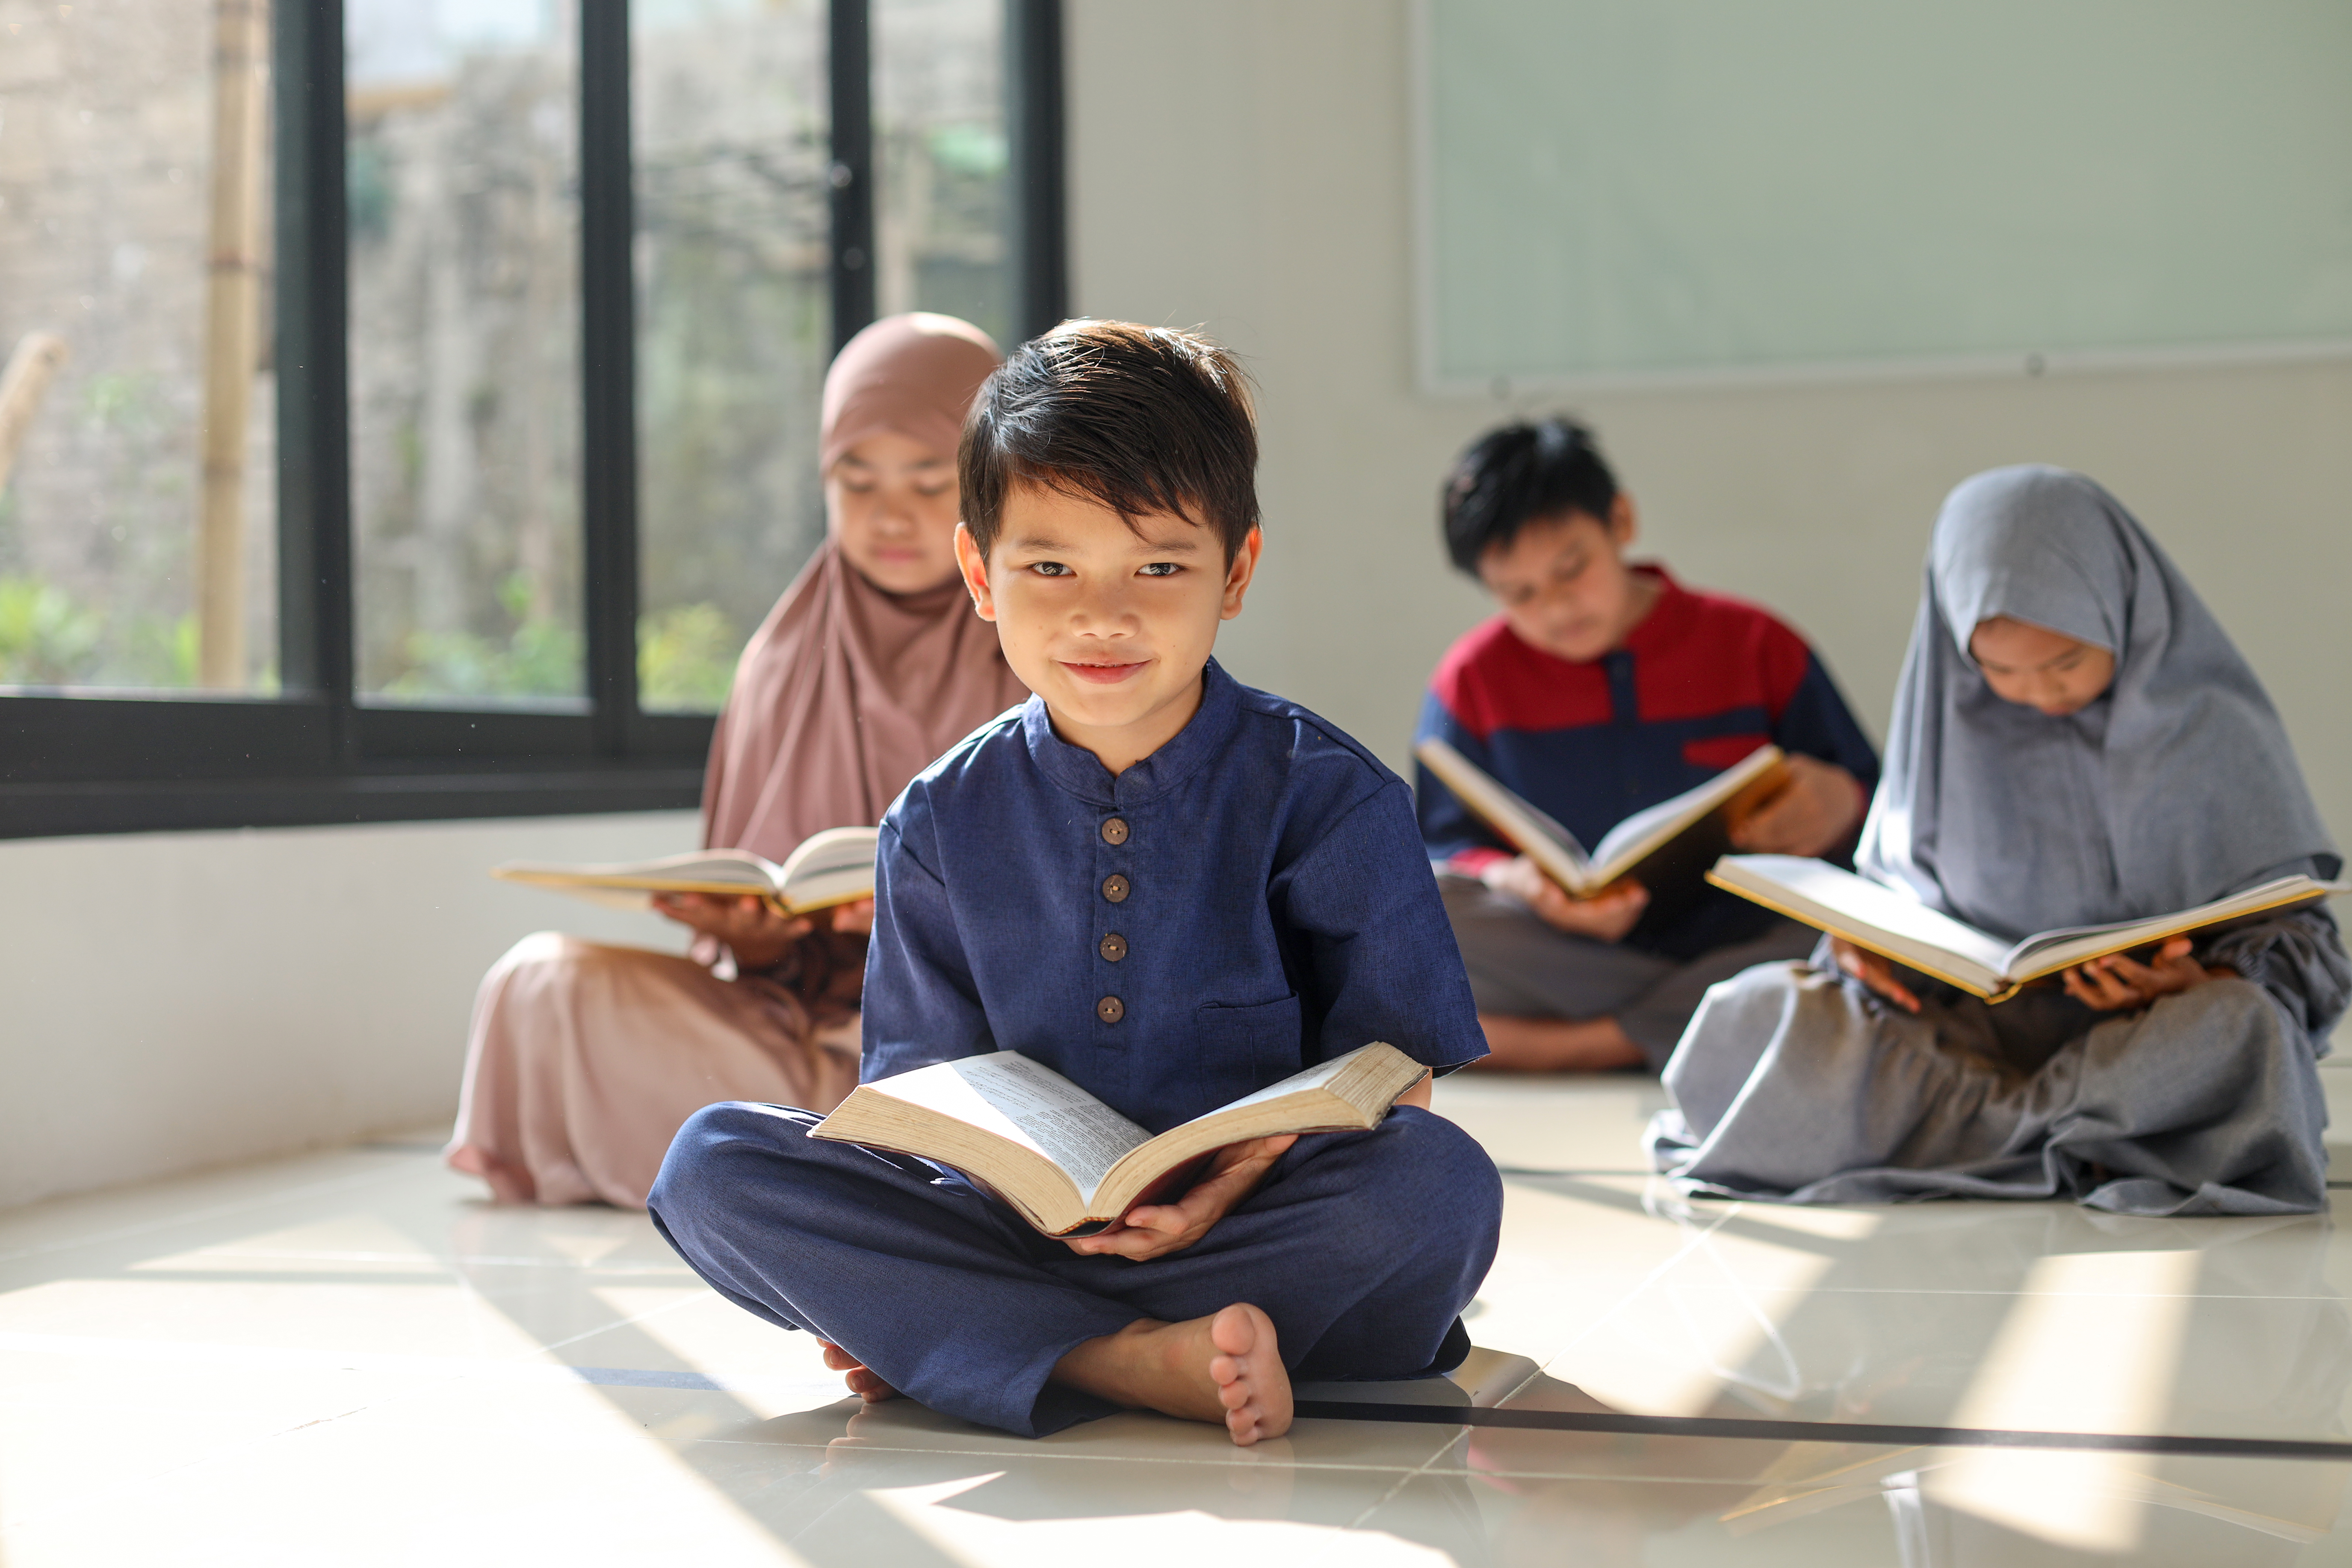 A cute little boy smiling at camera after reading the Koran with friends